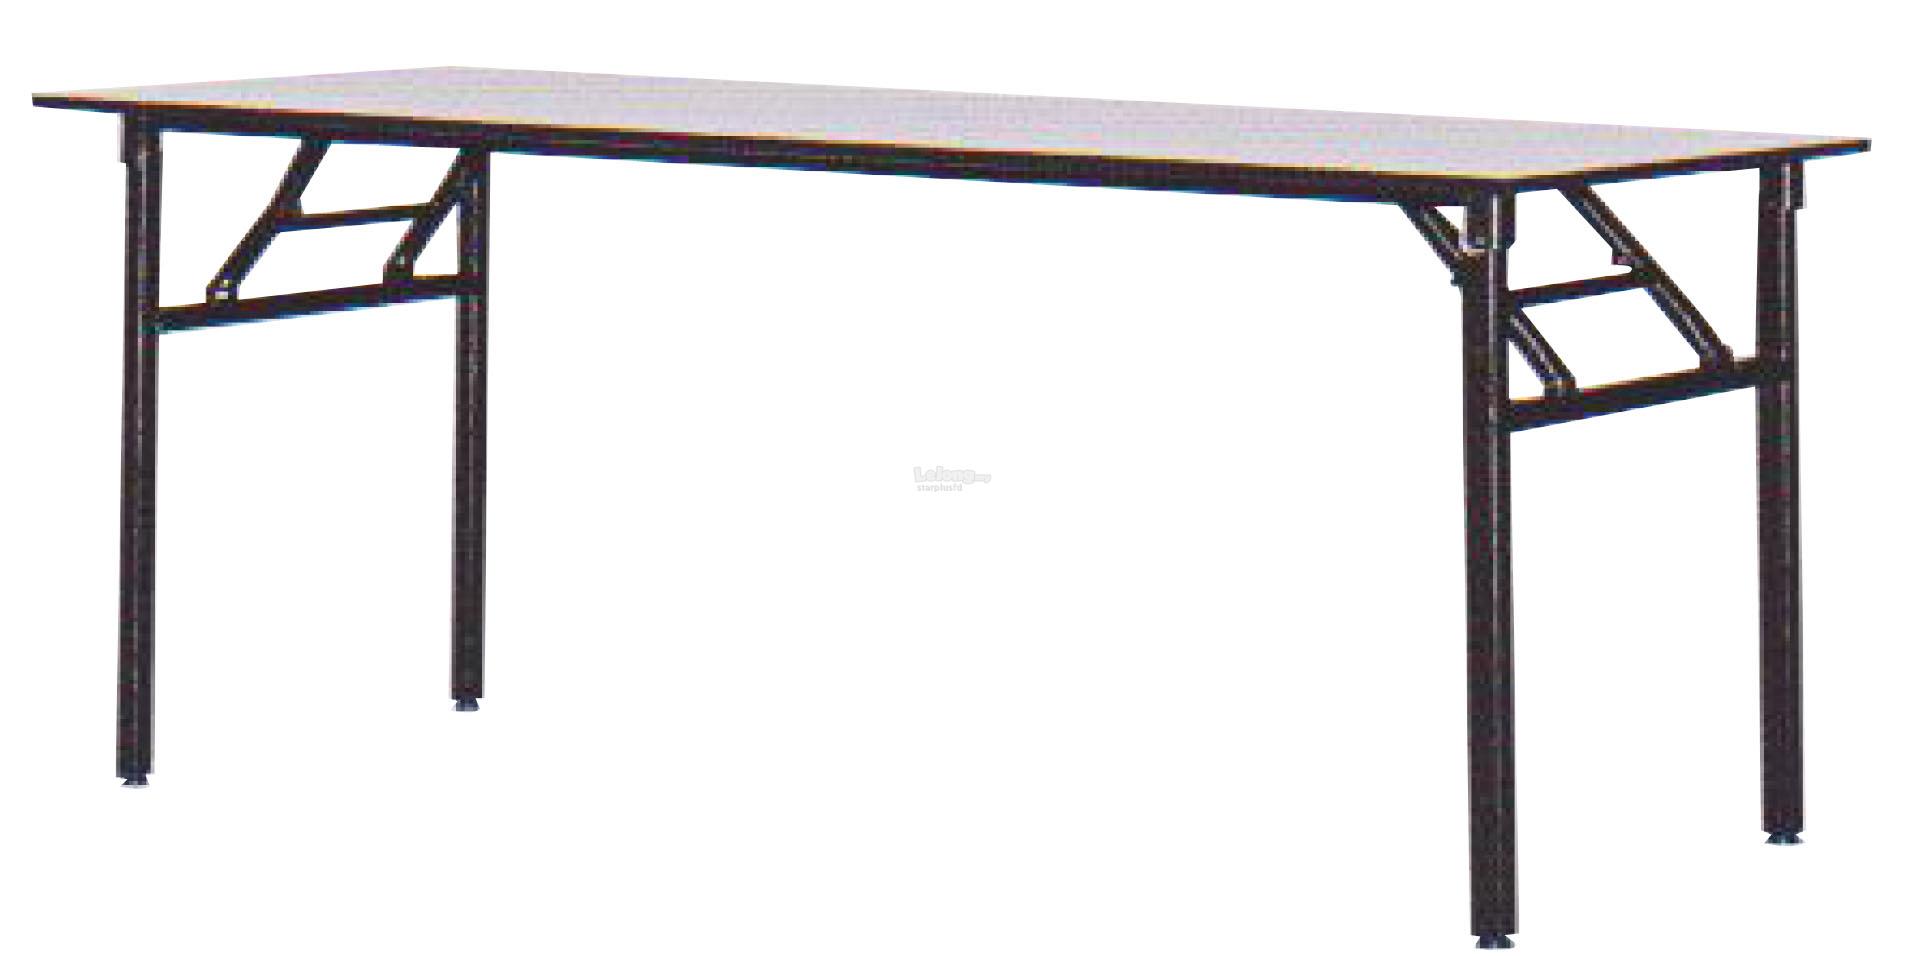 Folding Table / Banquet Table 1500mm(W) x 750mm(D) x 760mm(H)